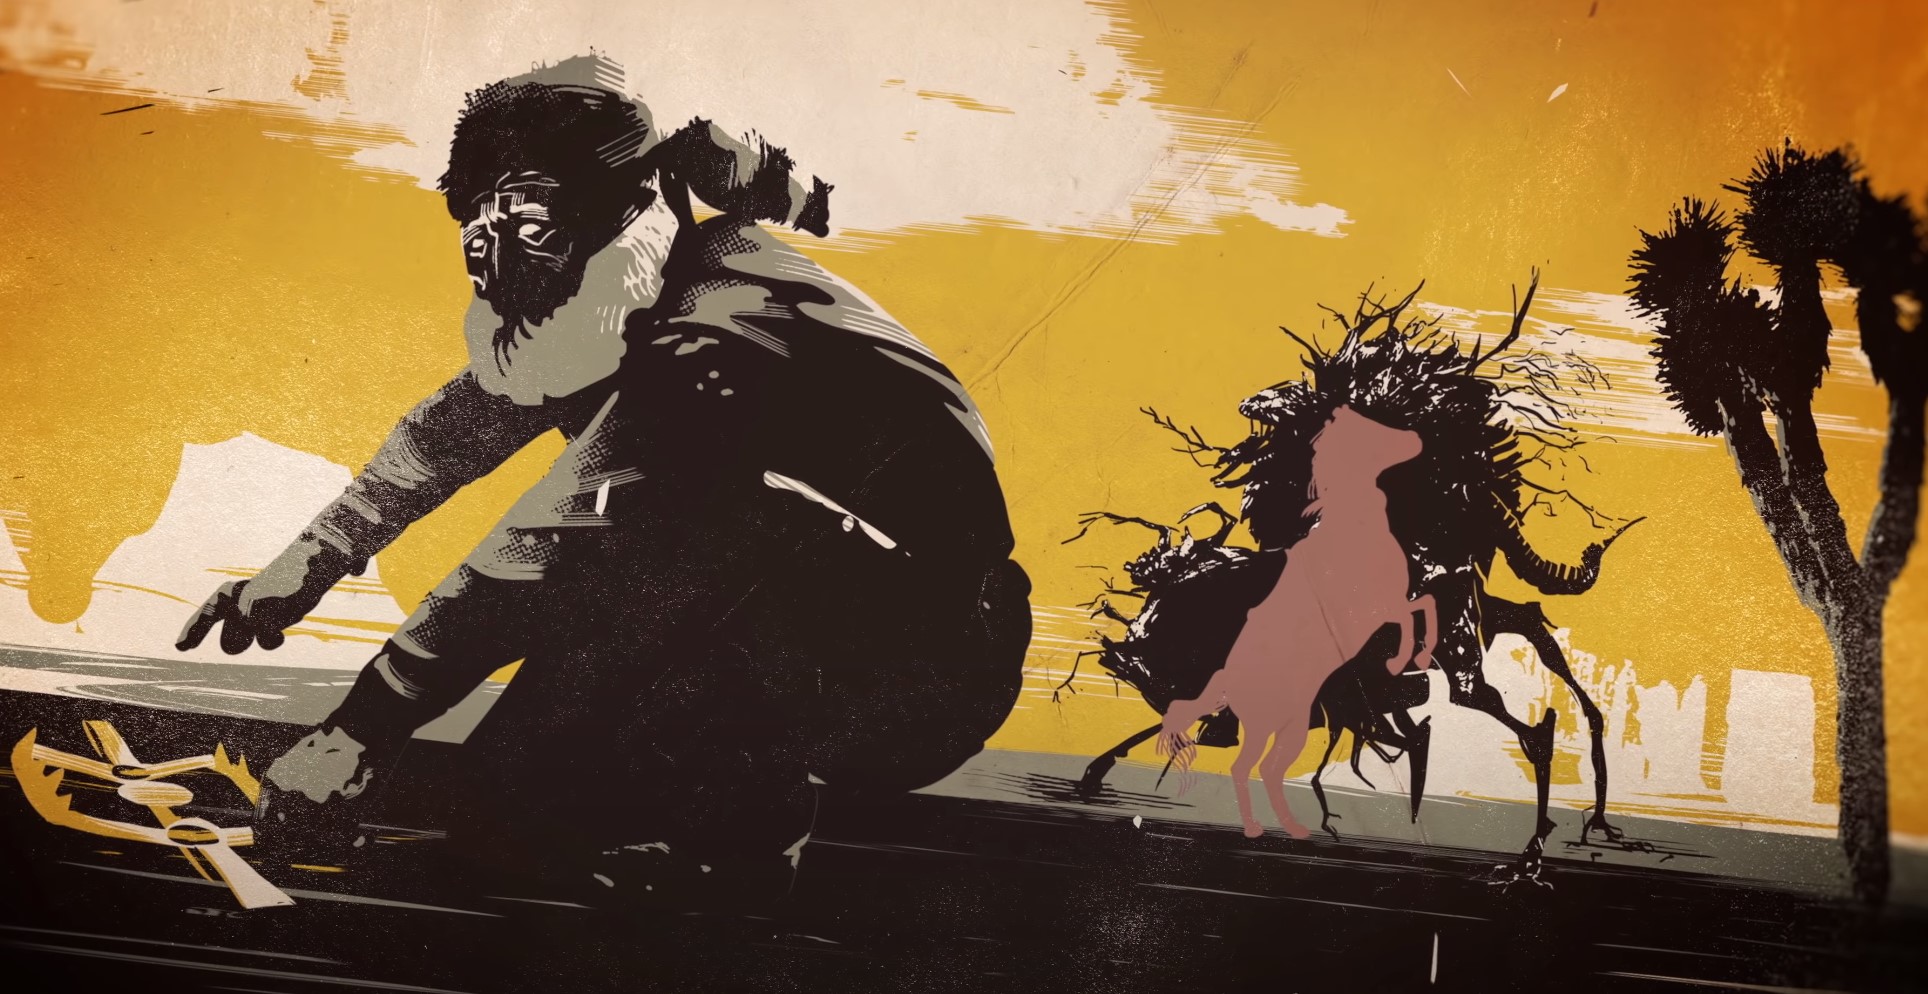  Weird West is swinging just as hard as Prey and Dishonored 